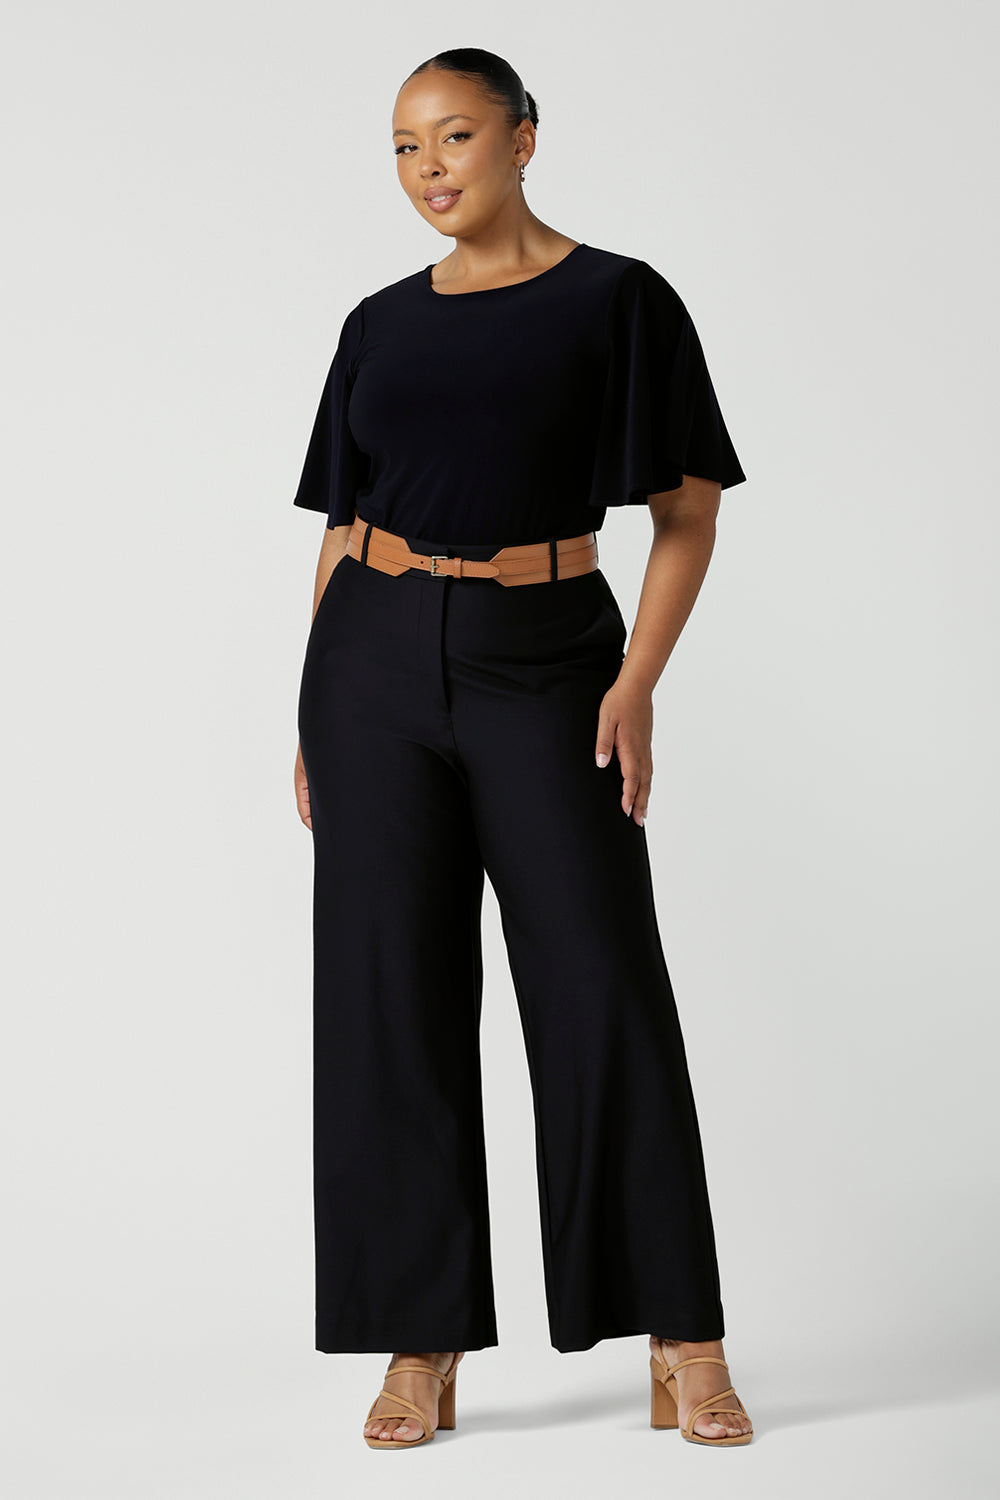 A good full length trouser for plus size women, these Navy blue, tailored wide leg pants are shown on a size 18, curvy woman. Worn with a high neck, flutter sleeve top in navy jersey, these elegant pants wear for work as smart casual wear. Shop made in Australia trousers for women online at women's clothing brand Leina & Fleur.